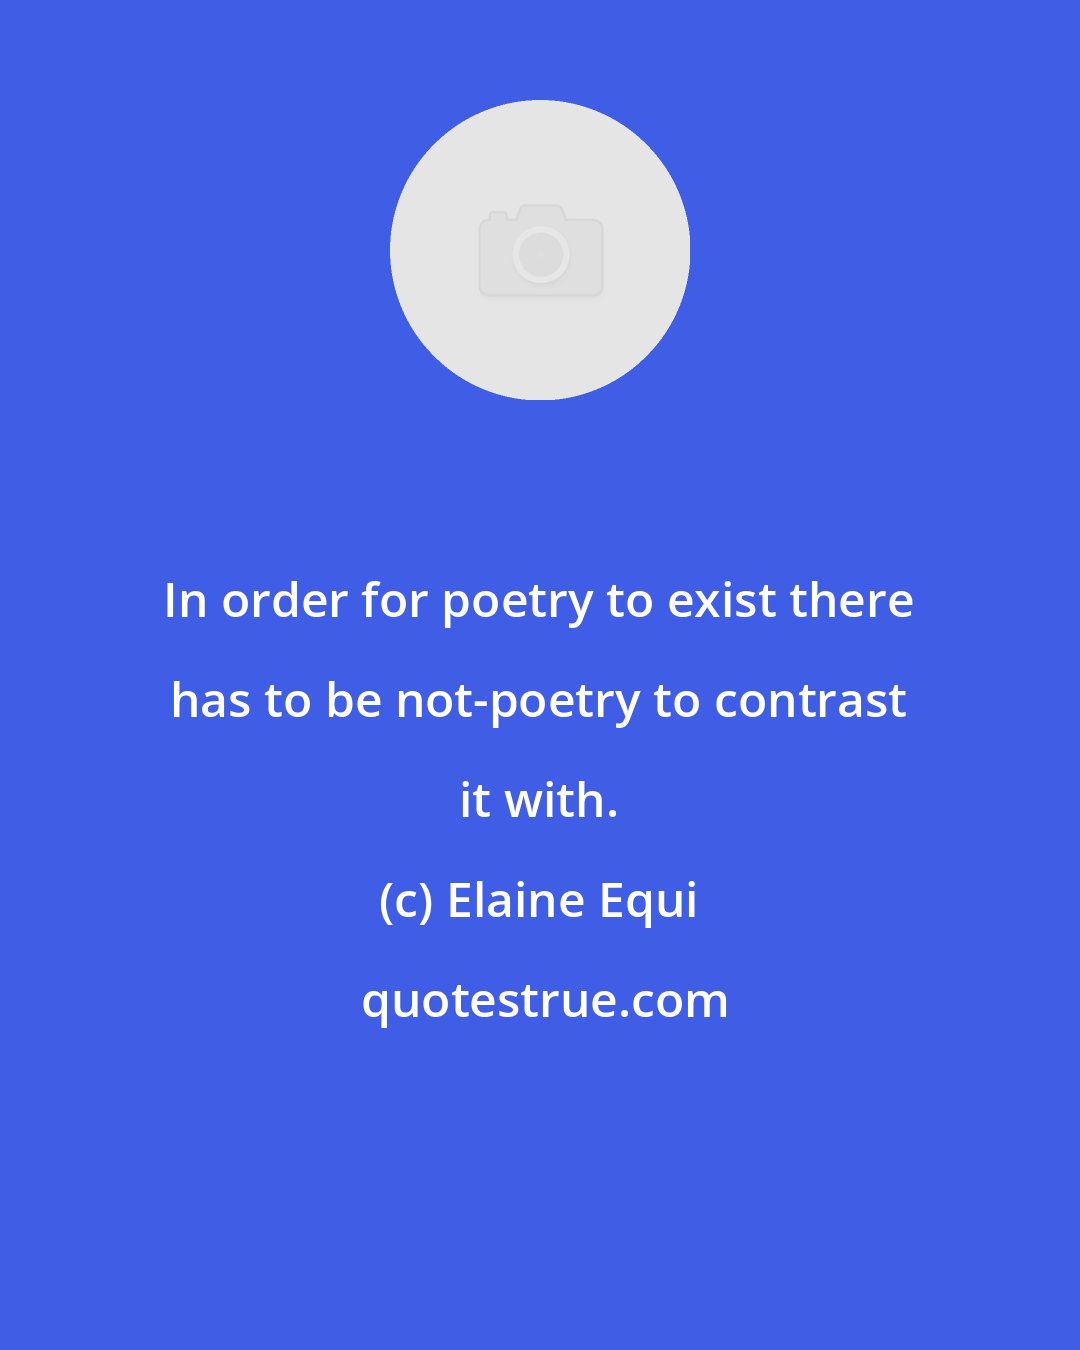 Elaine Equi: In order for poetry to exist there has to be not-poetry to contrast it with.